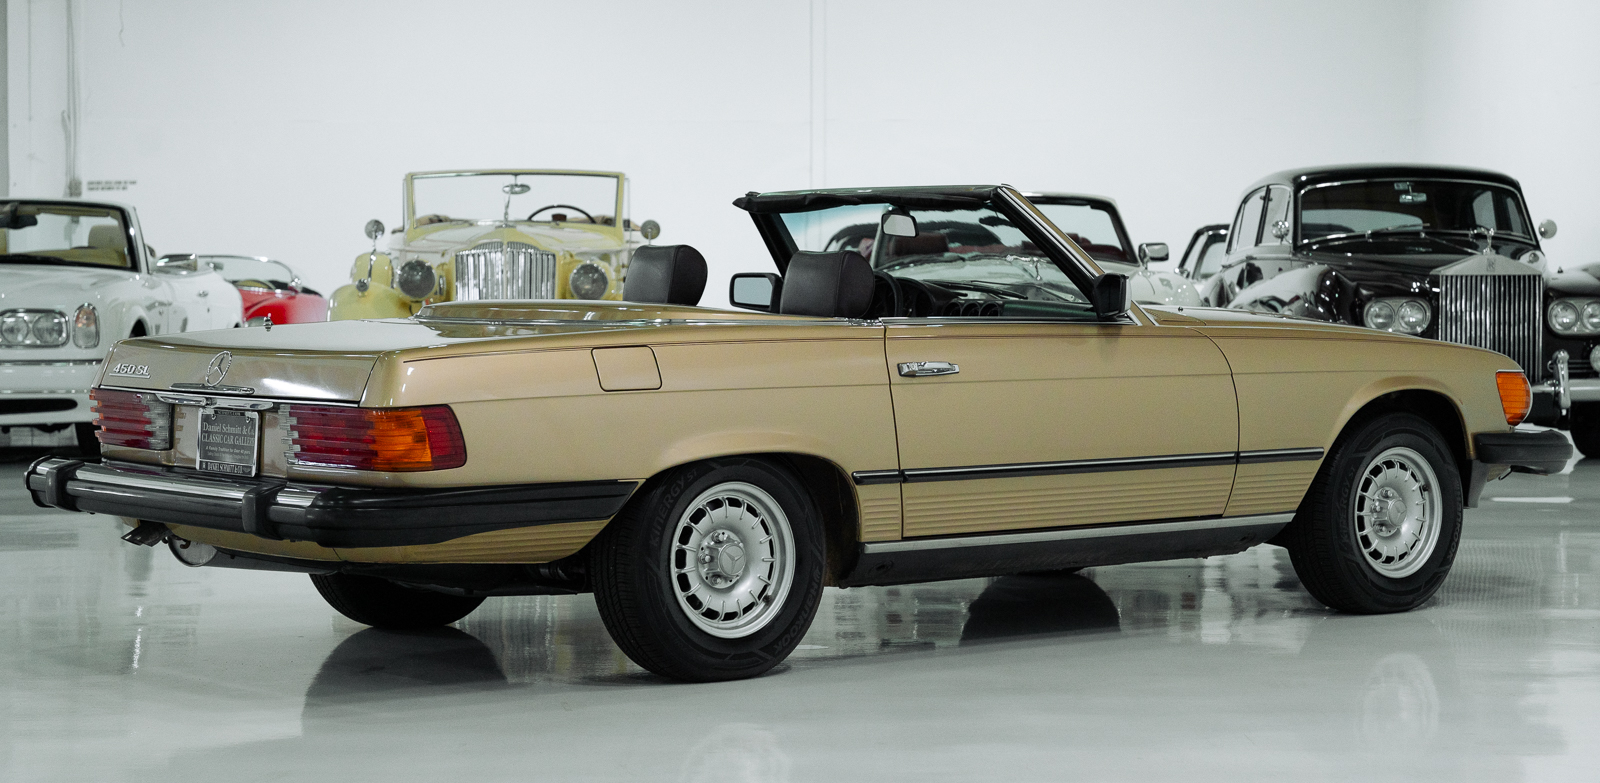 1980 MERCEDES-BENZ 450 SL ROADSTER (ONLY 15,533 MILES